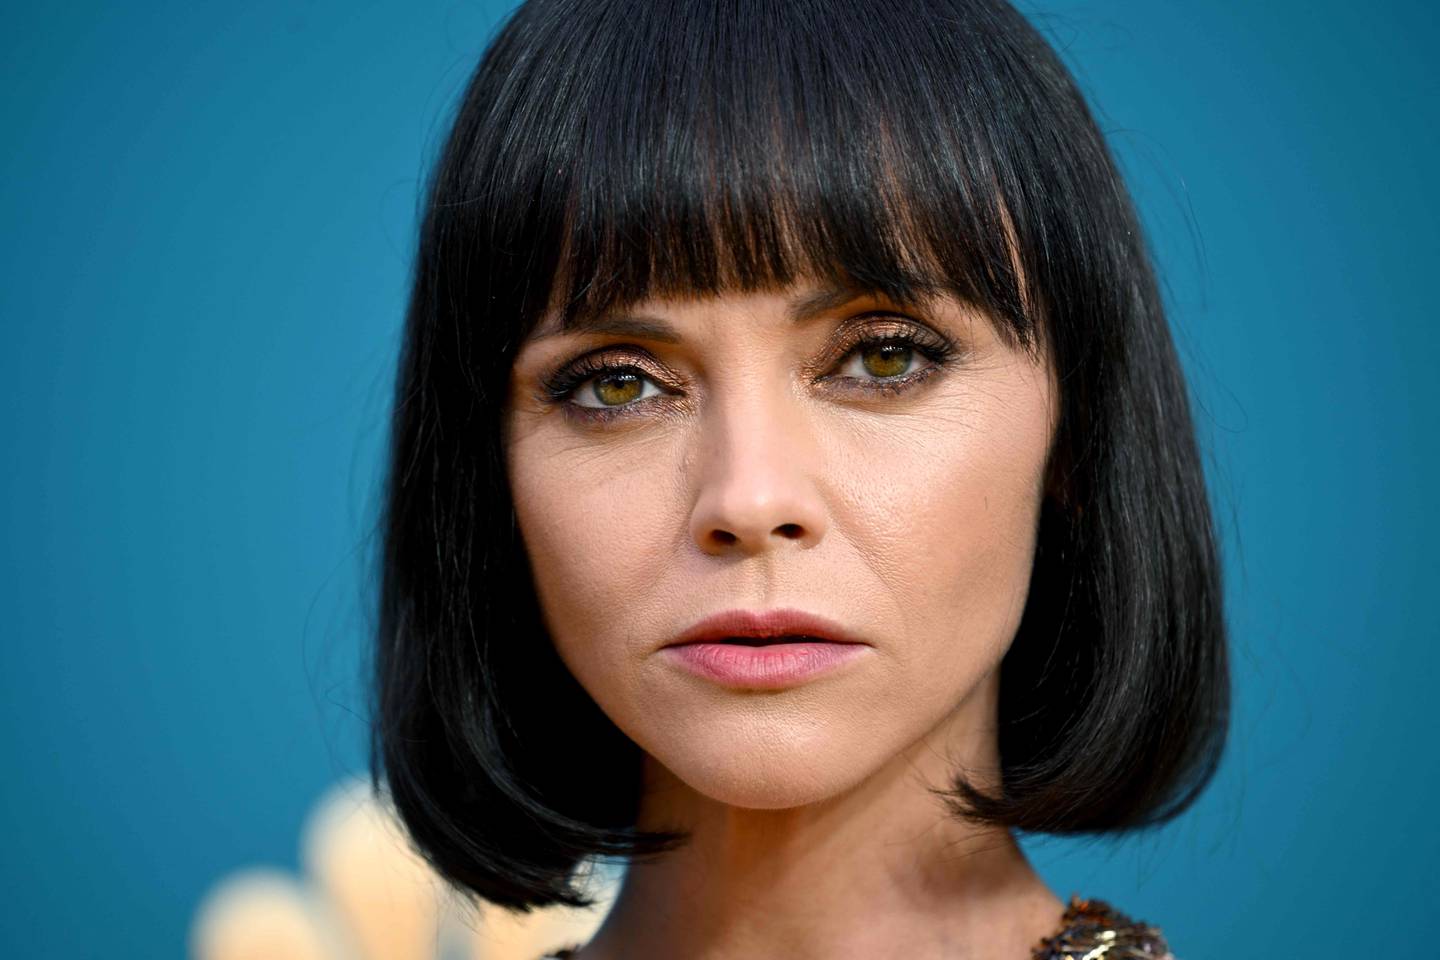 US actress Christina Ricci plays Ms Thornhill in 'Wednesday'. AFP